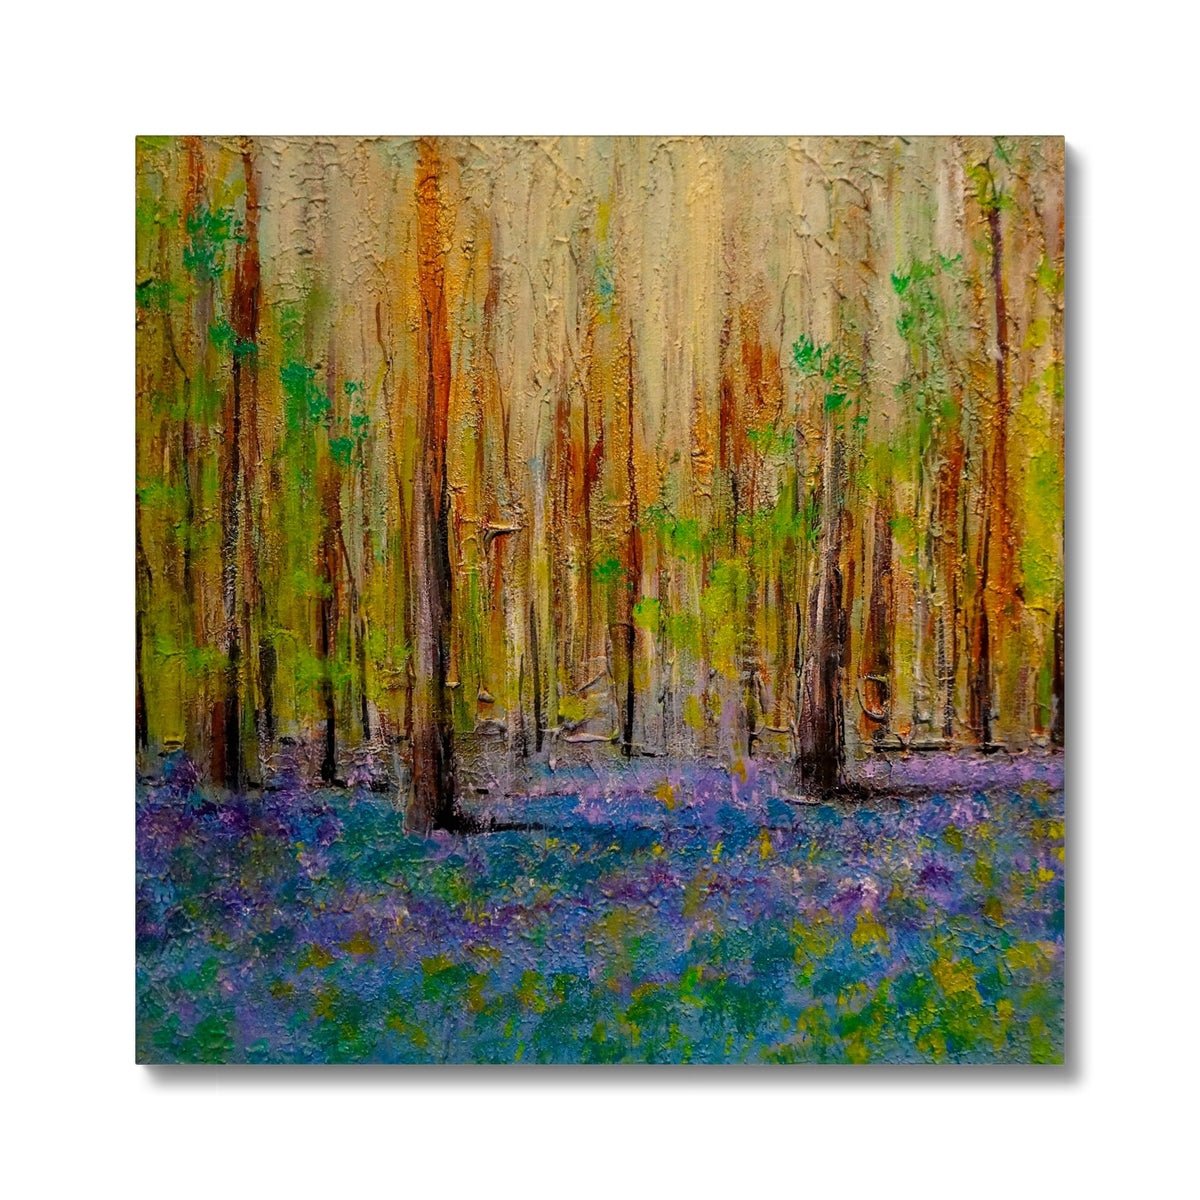 Highland Bluebells Painting | Canvas From Scotland-Contemporary Stretched Canvas Prints-Scottish Highlands & Lowlands Art Gallery-24"x24"-Paintings, Prints, Homeware, Art Gifts From Scotland By Scottish Artist Kevin Hunter